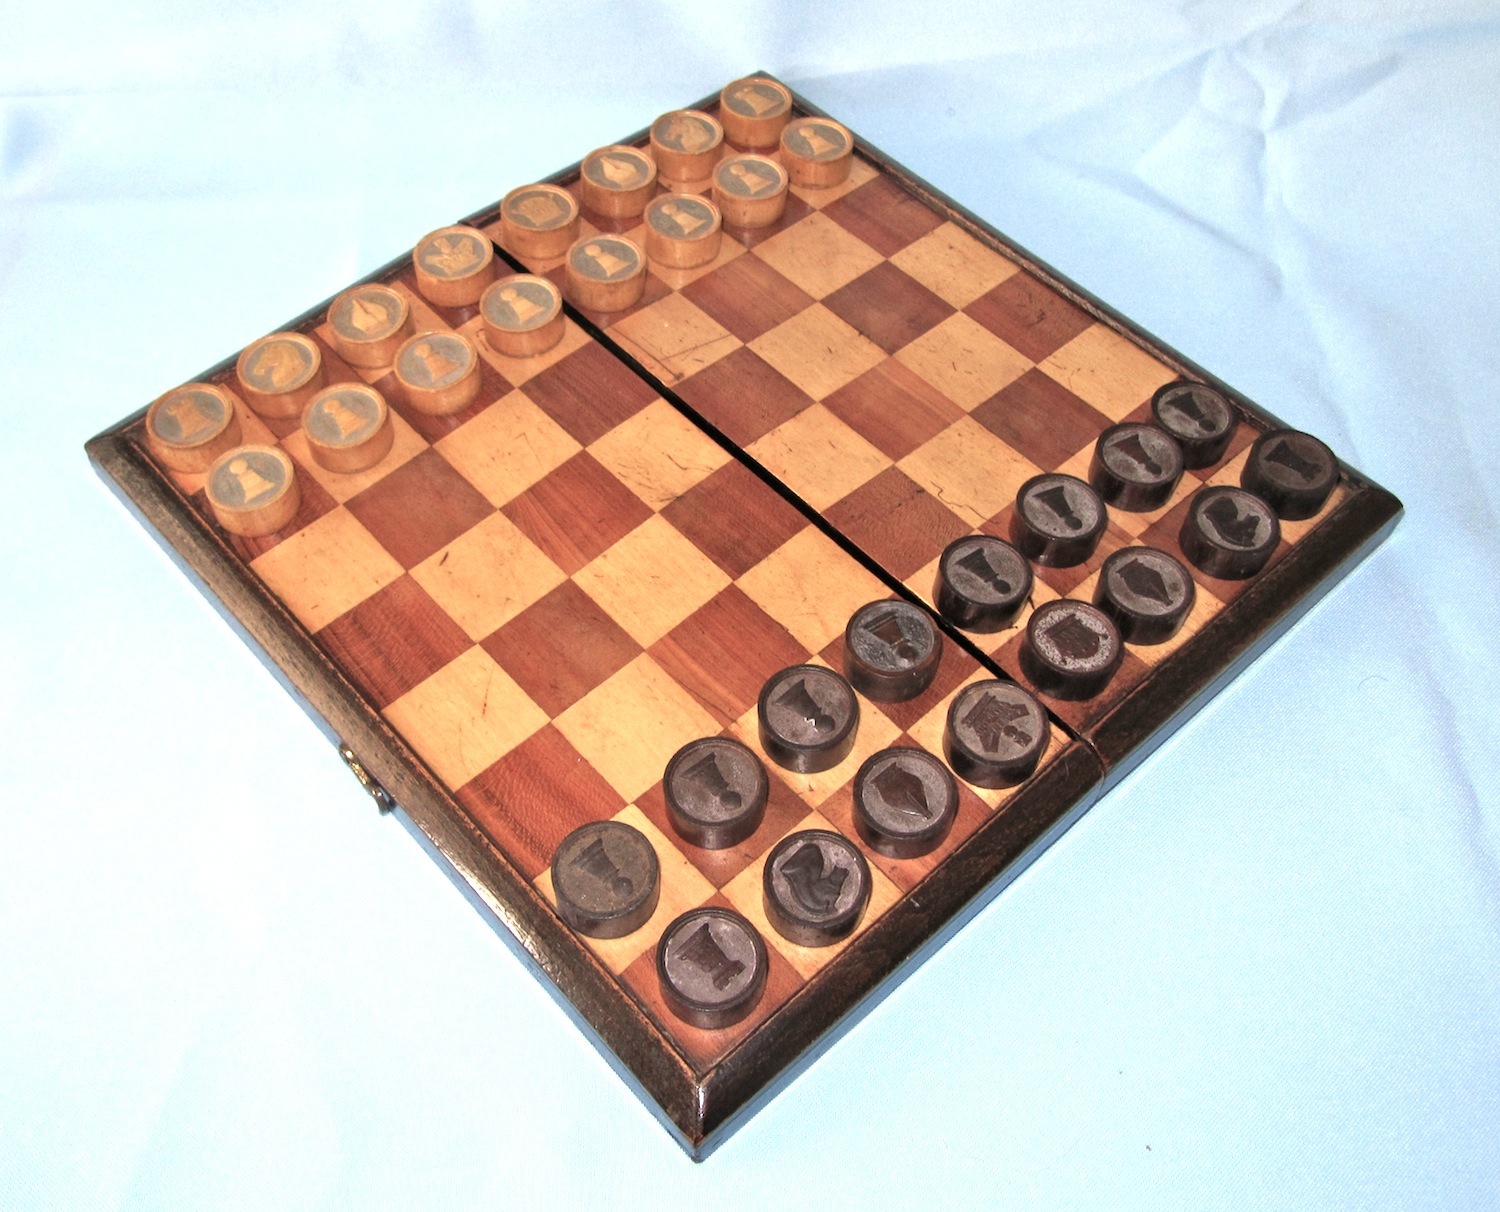 Games Box with Checkers / Draughts Circa 1830: Opens to a Chess Board